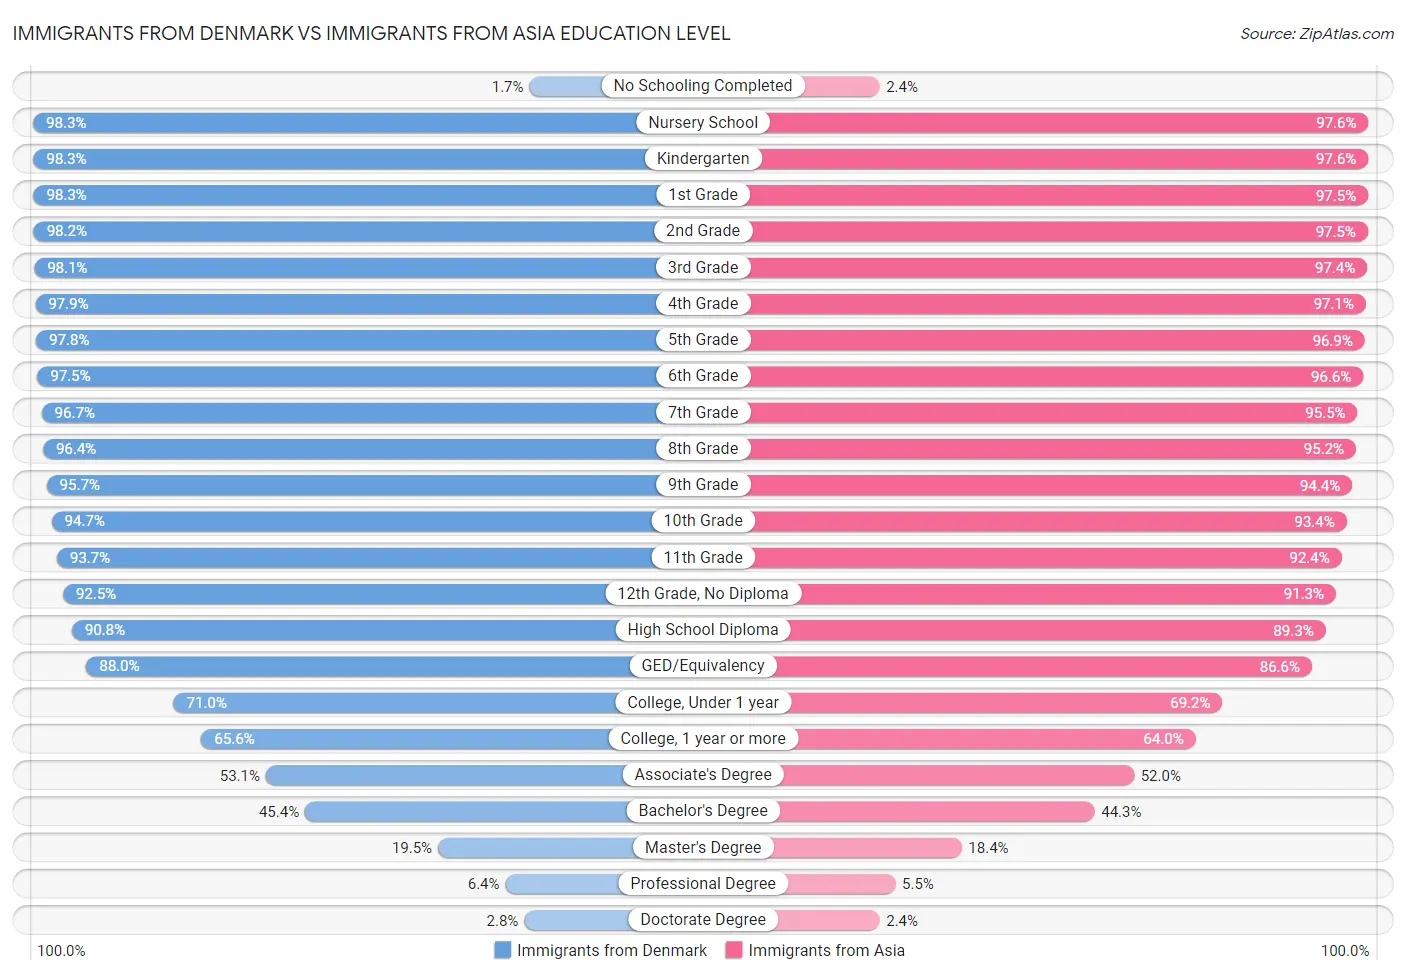 Immigrants from Denmark vs Immigrants from Asia Education Level